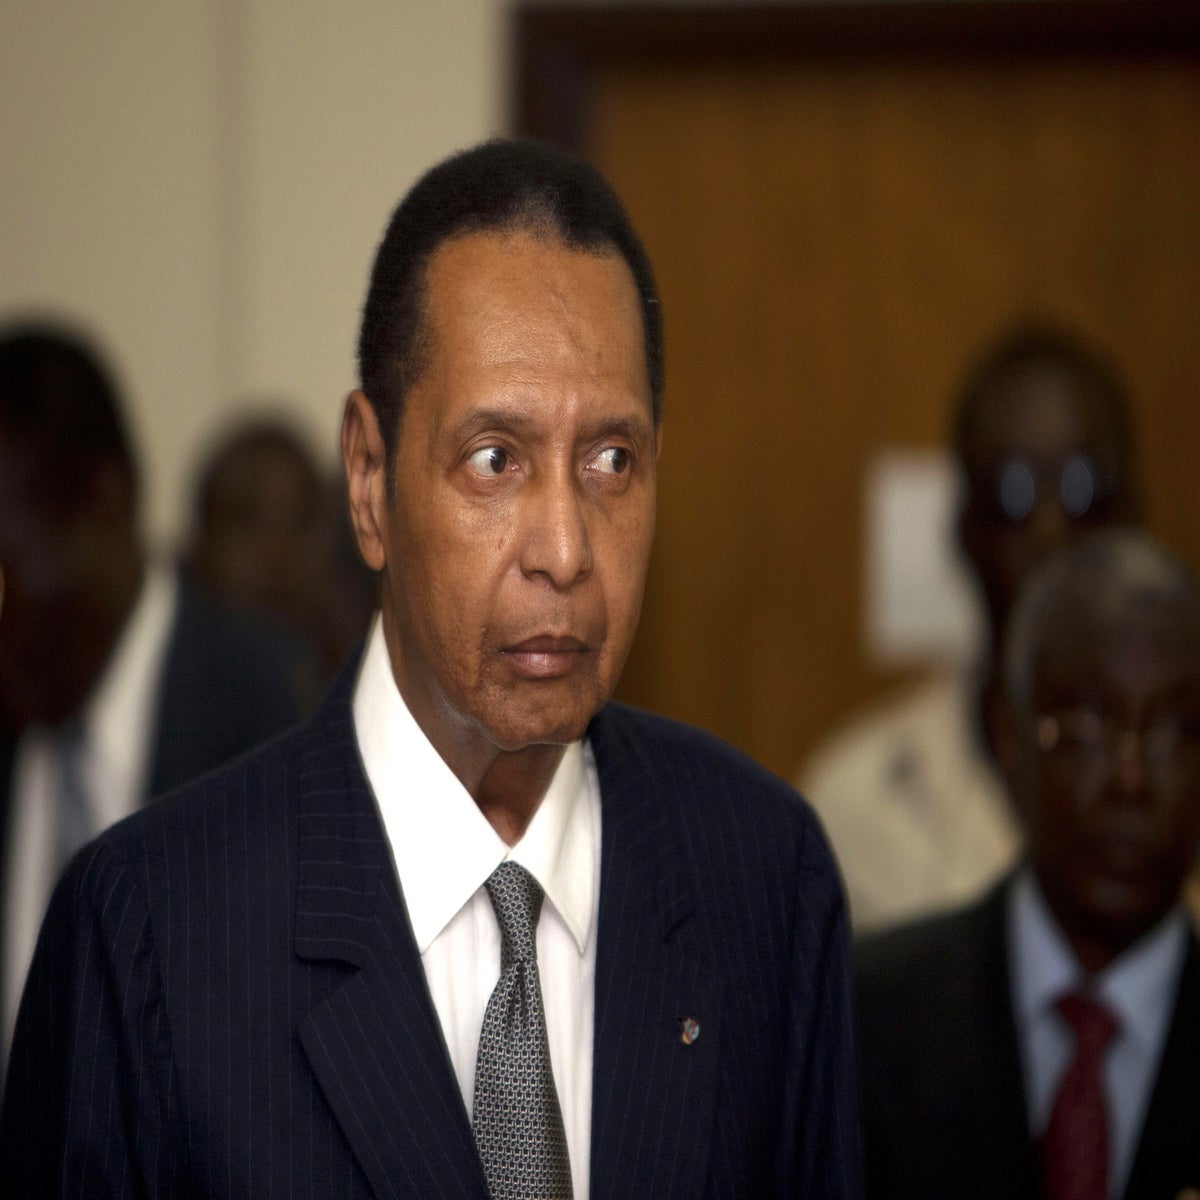 https://static.independent.co.uk/s3fs-public/thumbnails/image/2014/10/05/20/Jean-Claude-Duvalier.jpg?width=1200&height=1200